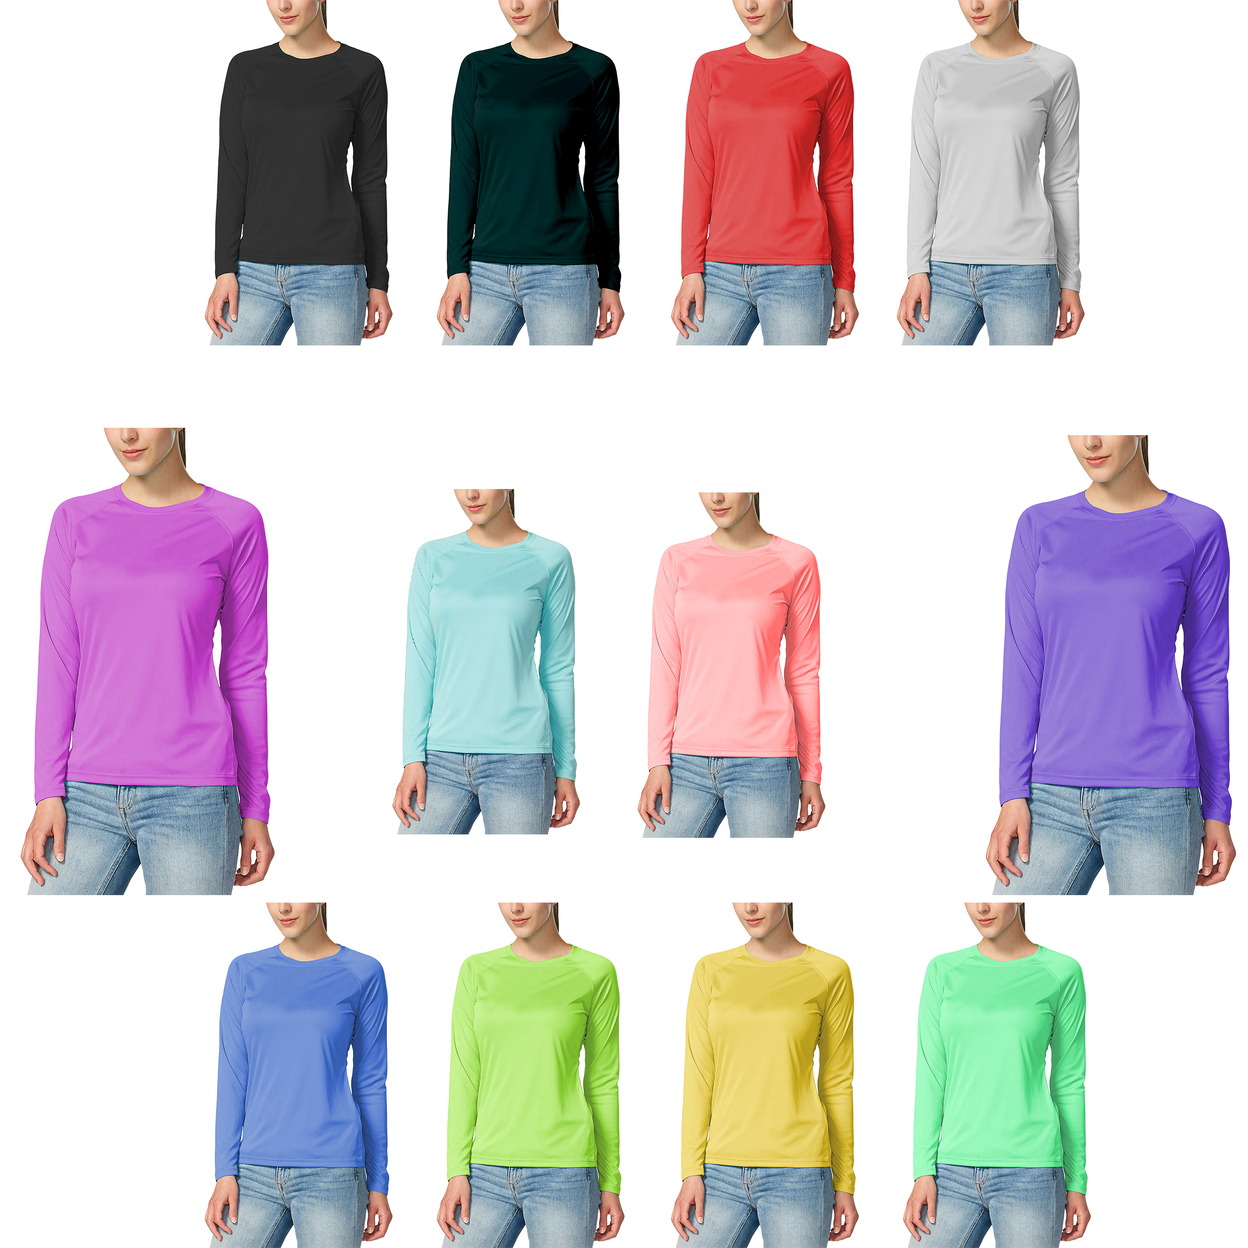 5-Pack: Women's Dri-Fit Moisture-Wicking Breathable Long Sleeve T-Shirt - X-large